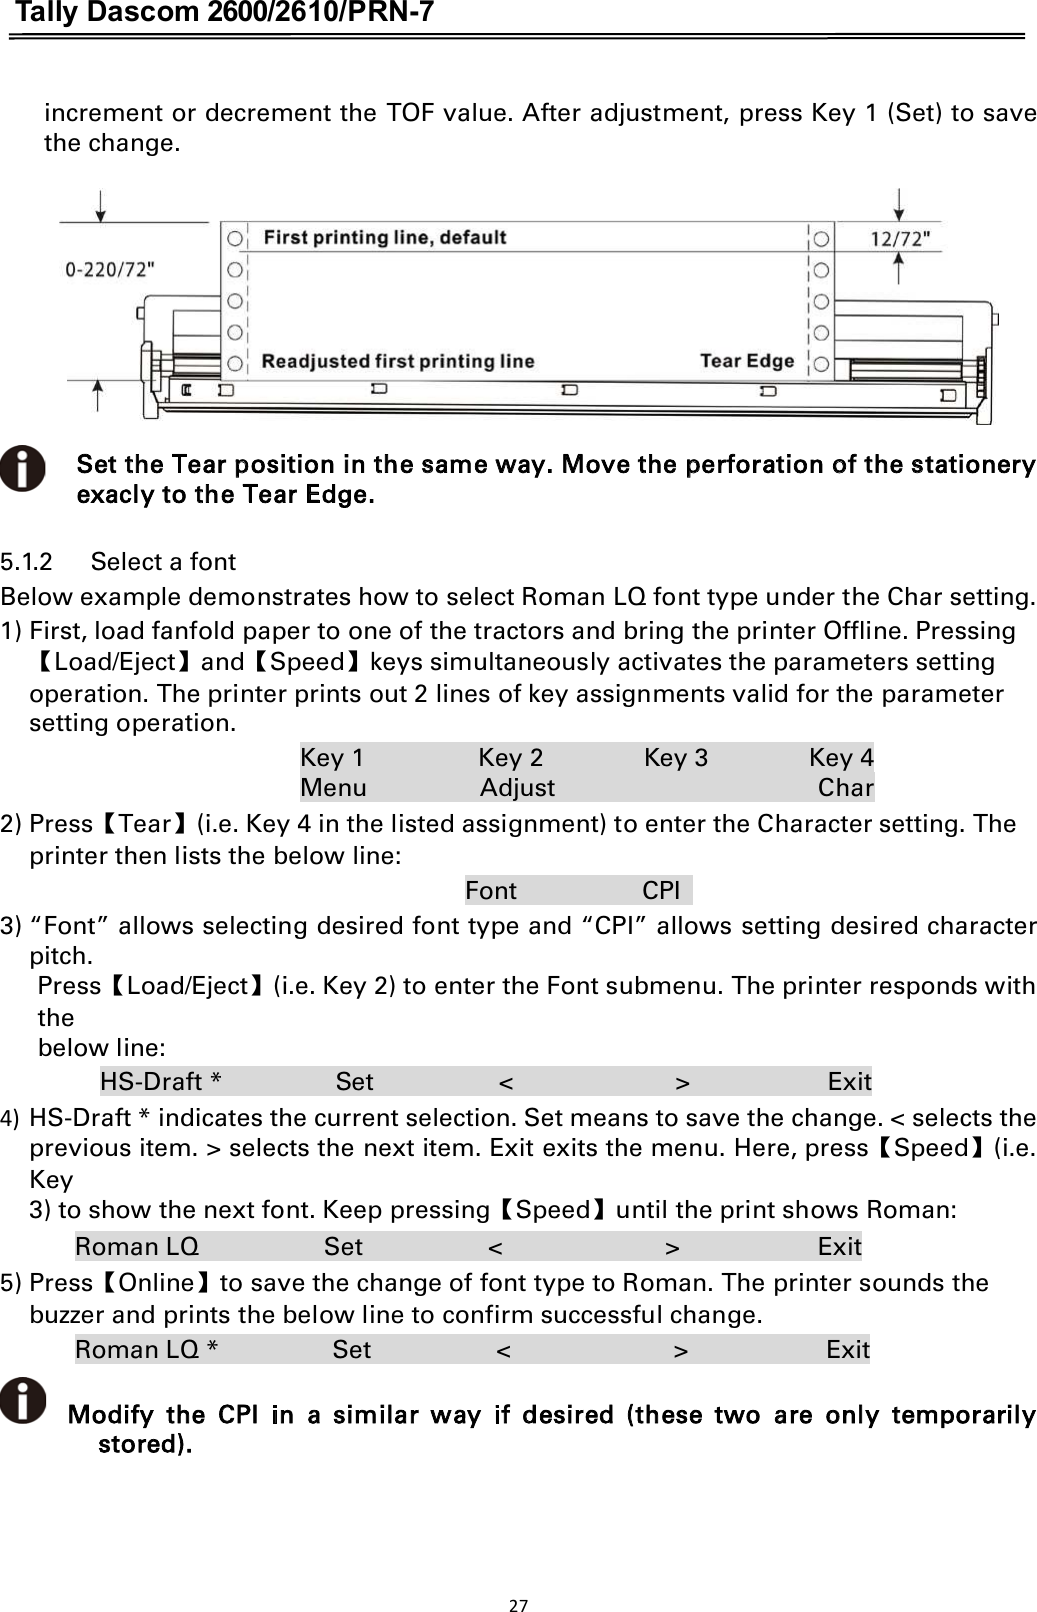 Tally Dascom 2600/2610/PRN-7  increment or decrement the TOF value. After adjustment, press Key 1 (Set) to save the change.   Set the Tear position in the same way. Move the perforation of the stationery exacly to the Tear Edge. 5.1.2      Select a font   Below example demonstrates how to select Roman LQ font type under the Char setting. 1) First, load fanfold paper to one of the tractors and bring the printer Offline. Pressing ǏLoad/EjectǐandǏSpeedǐkeys simultaneously activates the parameters setting   operation. The printer prints out 2 lines of key assignments valid for the parameter setting operation.   Key 1                  Key 2                Key 3                Key 4 Menu                  Adjust                                          Char 2) PressǏTearǐ(i.e. Key 4 in the listed assignment) to enter the Character setting. The printer then lists the below line:                                                                           Font                    CPI                         3) “Font” allows selecting desired font type and “CPI” allows setting desired character pitch. PressǏLoad/Ejectǐ(i.e. Key 2) to enter the Font submenu. The printer responds with the below line:   HS-Draft *                  Set                    &lt;                          &gt;                      Exit 4) HS-Draft * indicates the current selection. Set means to save the change. &lt; selects the previous item. &gt; selects the next item. Exit exits the menu. Here, pressǏSpeedǐ(i.e. Key 3) to show the next font. Keep pressingǏSpeedǐuntil the print shows Roman:   Roman LQ                    Set                    &lt;                          &gt;                      Exit 5) PressǏOnlineǐto save the change of font type to Roman. The printer sounds the buzzer and prints the below line to confirm successful change.   Roman LQ *                  Set                    &lt;                          &gt;                      Exit     Modify  the  CPI  in  a  similar  way  if  desired  (these  two  are  only  temporarily stored). 27  